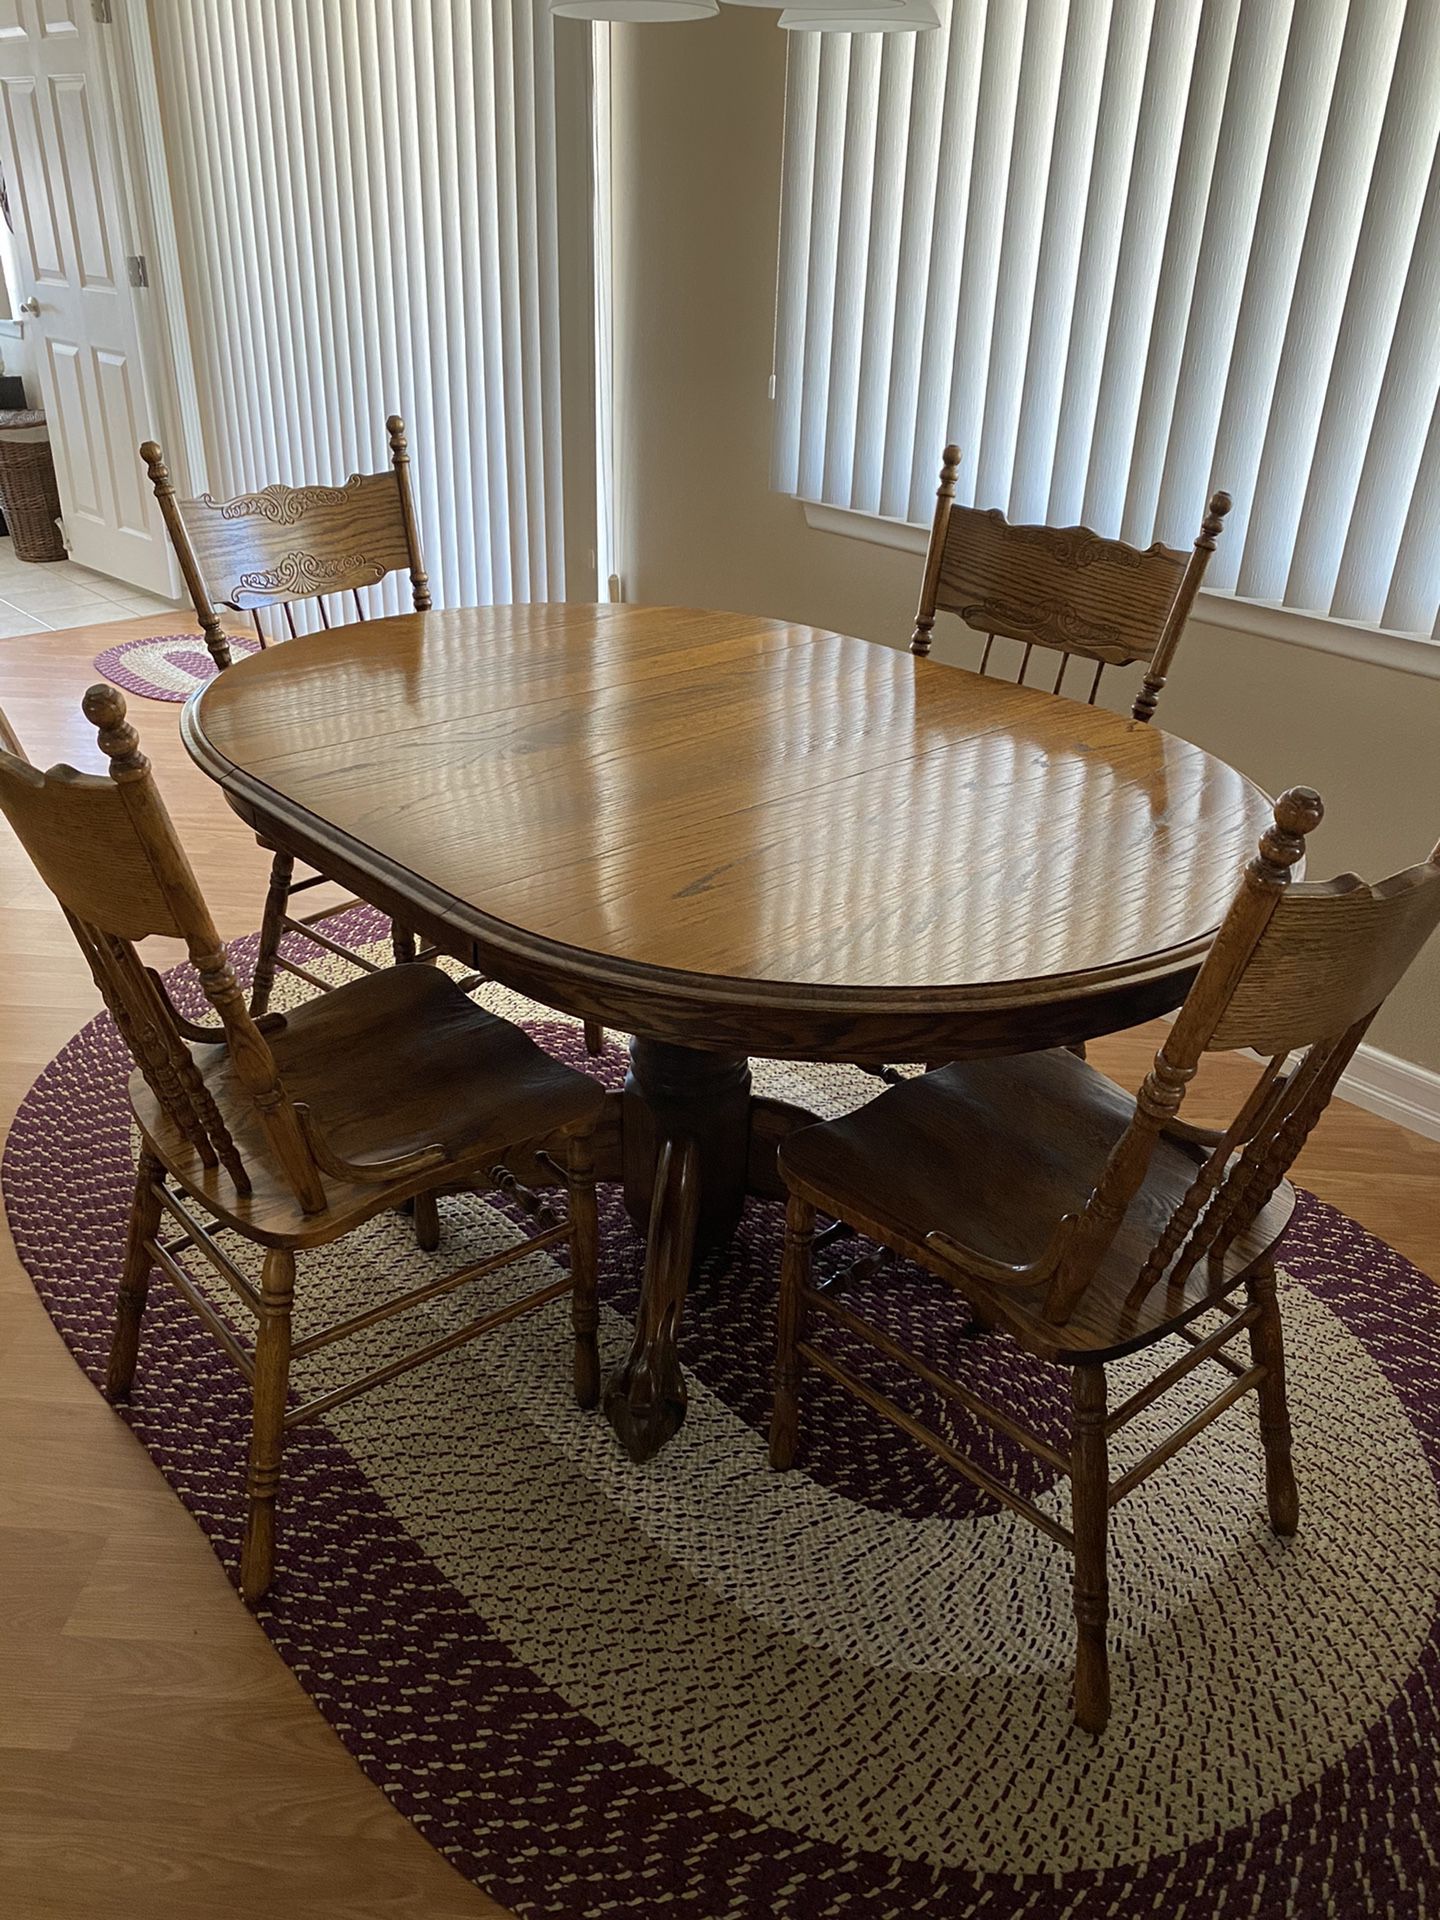 4 person table and chairs